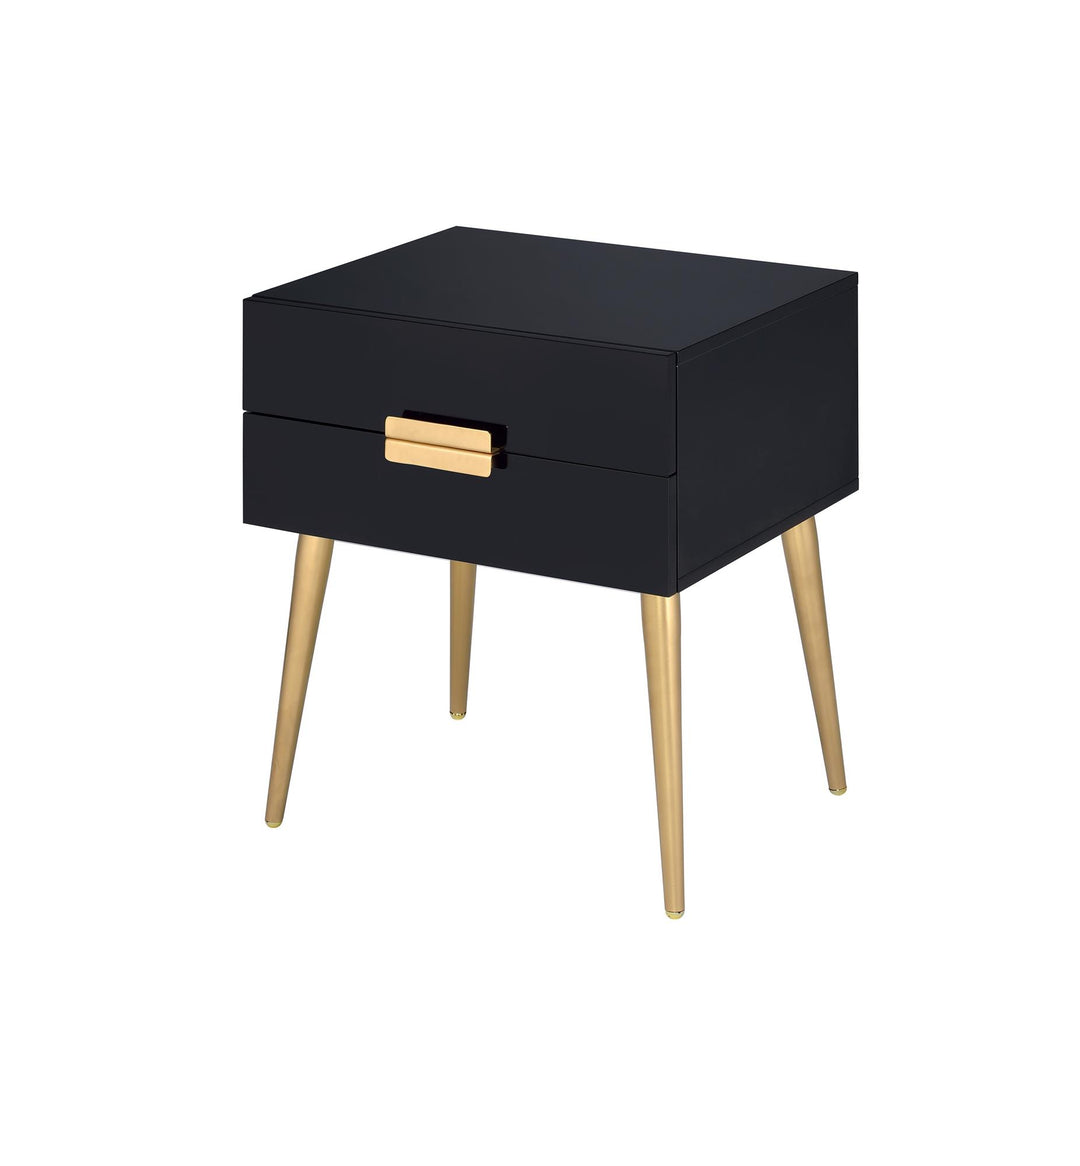 End Table with 2 closed Drawers - Black